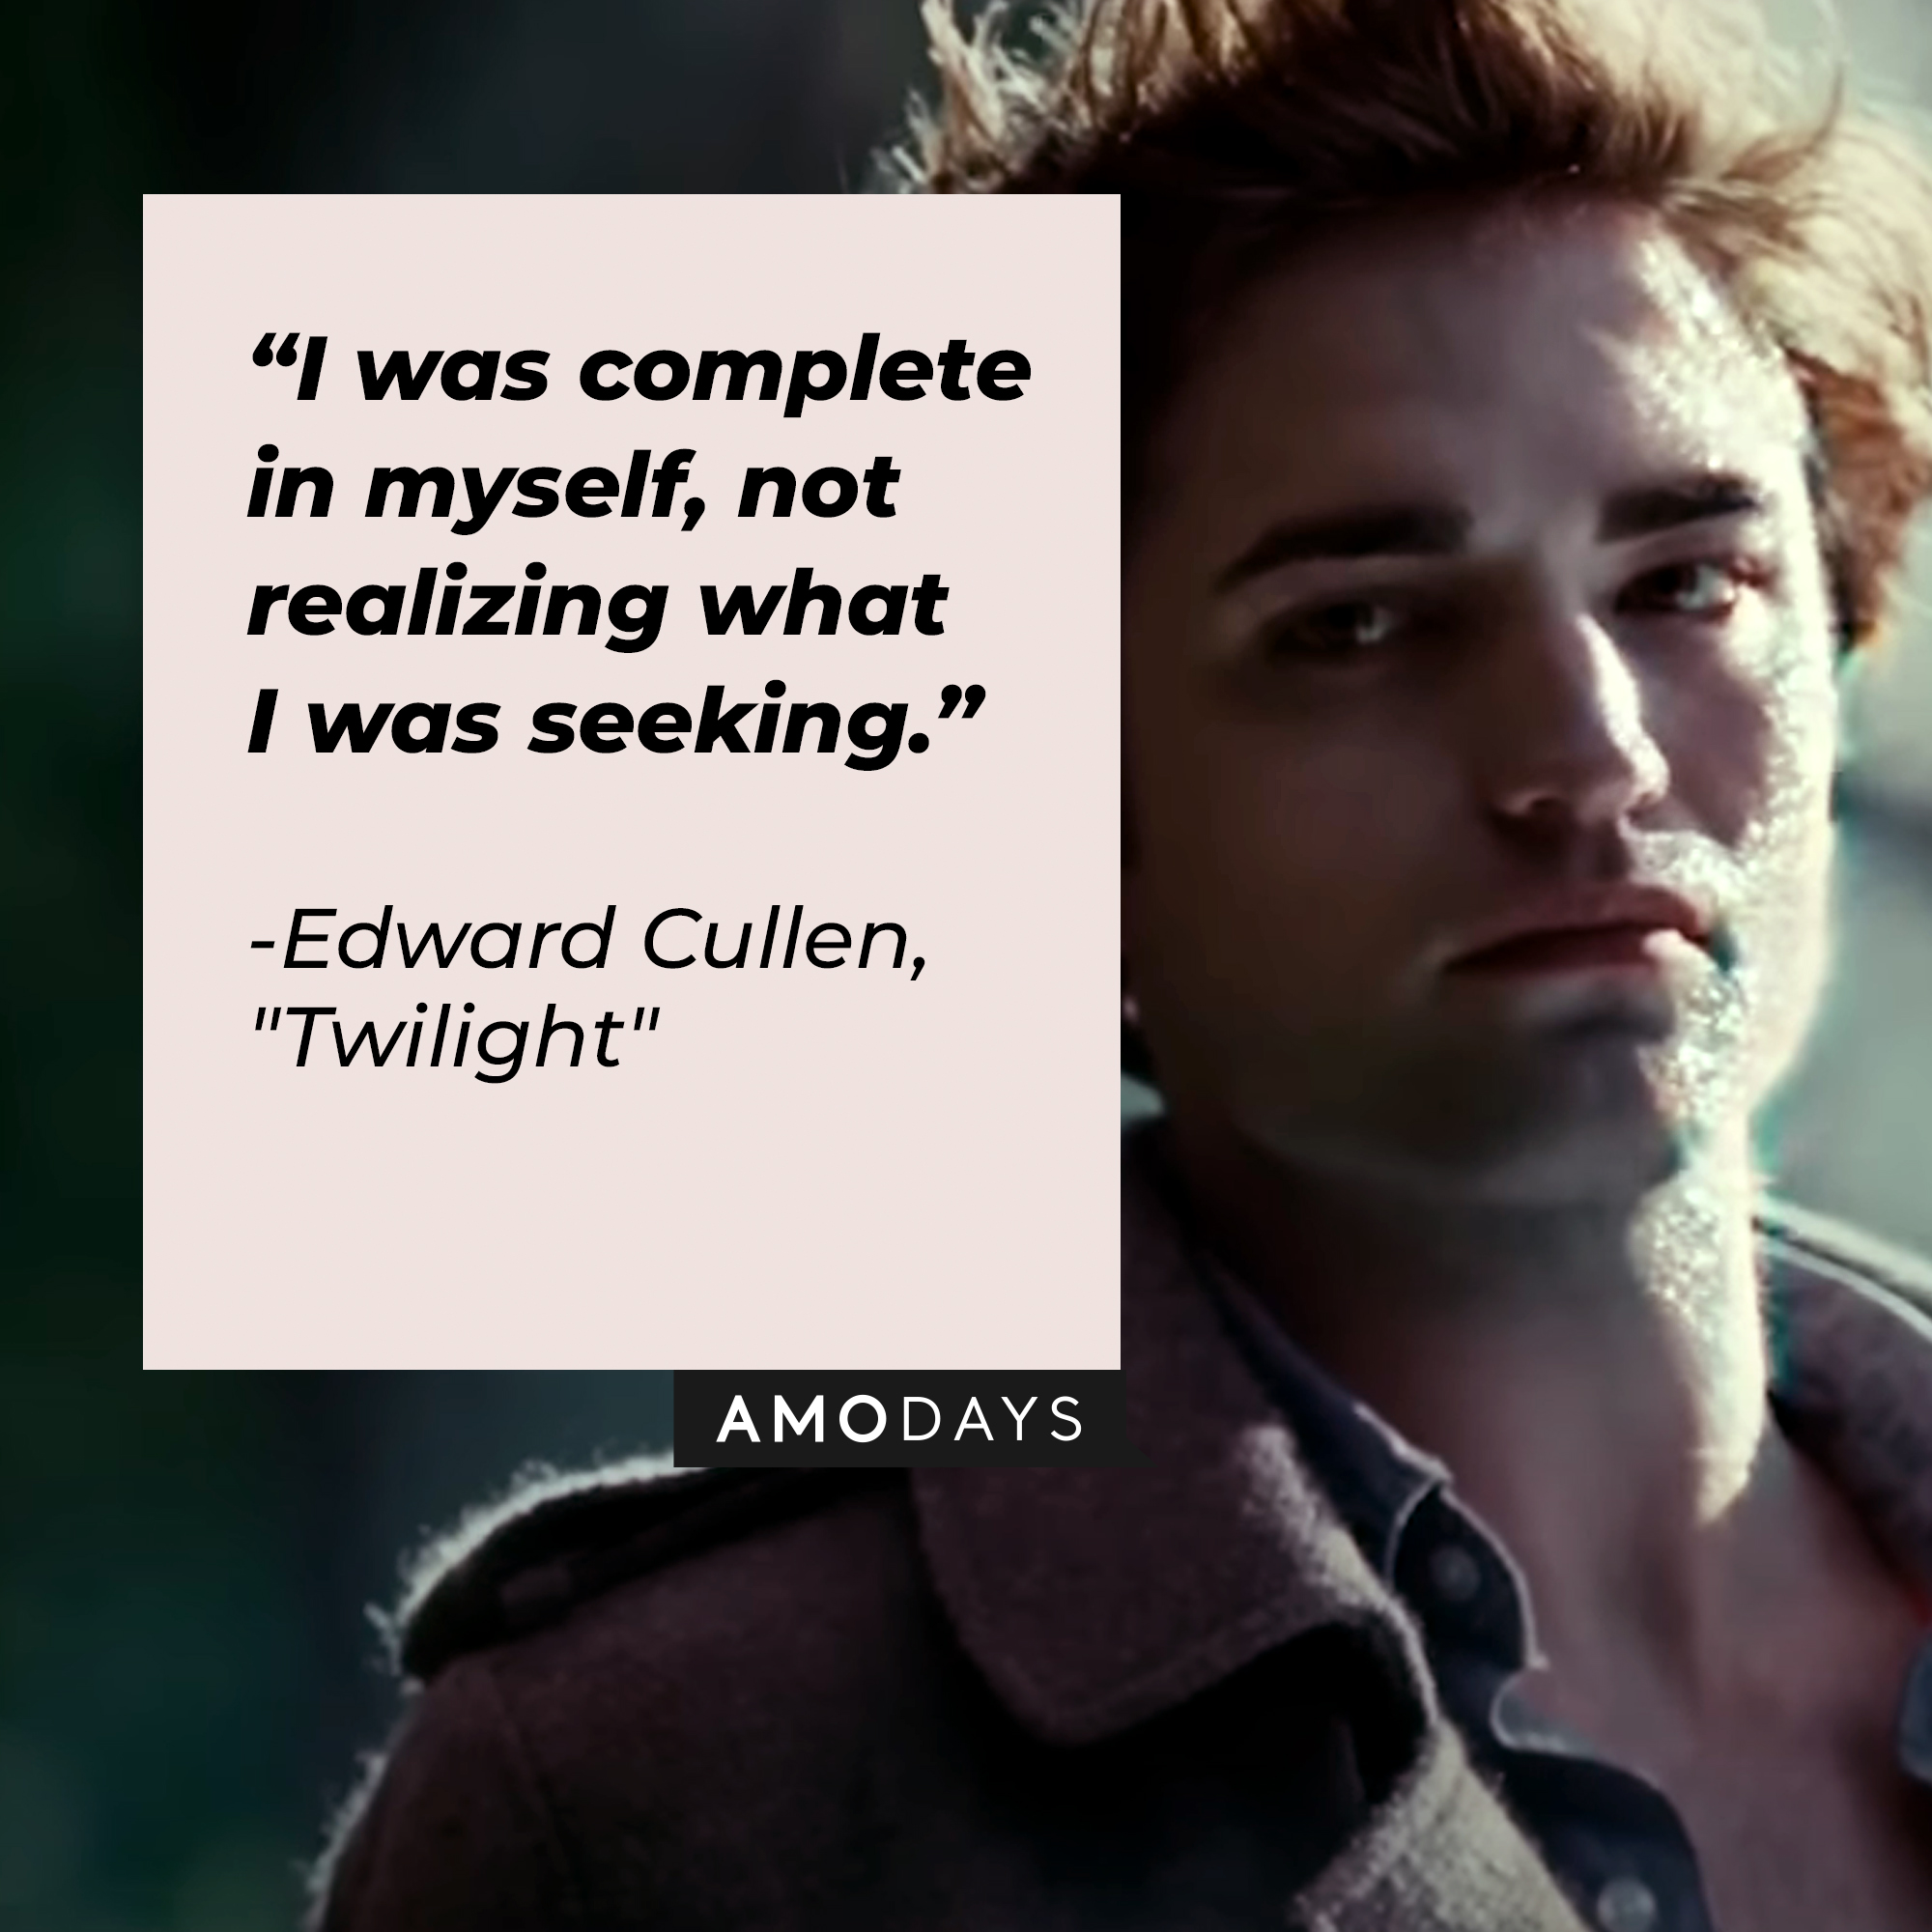 Edward Cullen with his quote: "I was complete in myself, not realizing what I was seeking." | Source: Facebook.com/twilight